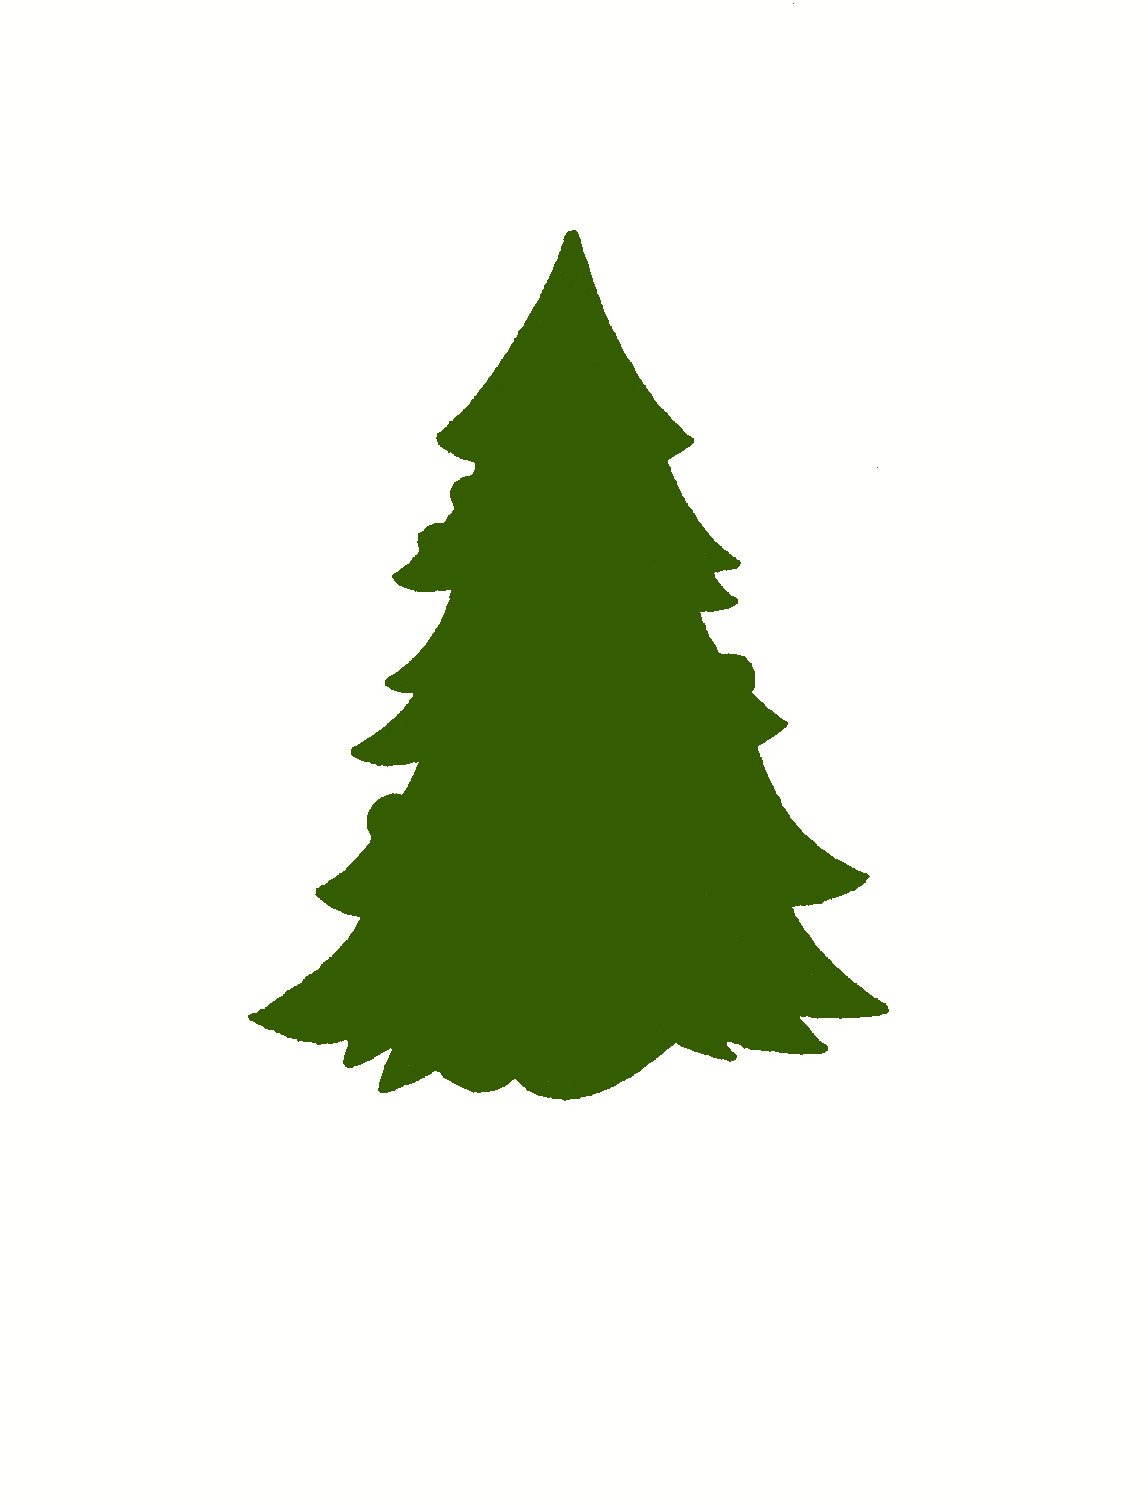 Green Christmas Tree Outline Clipart